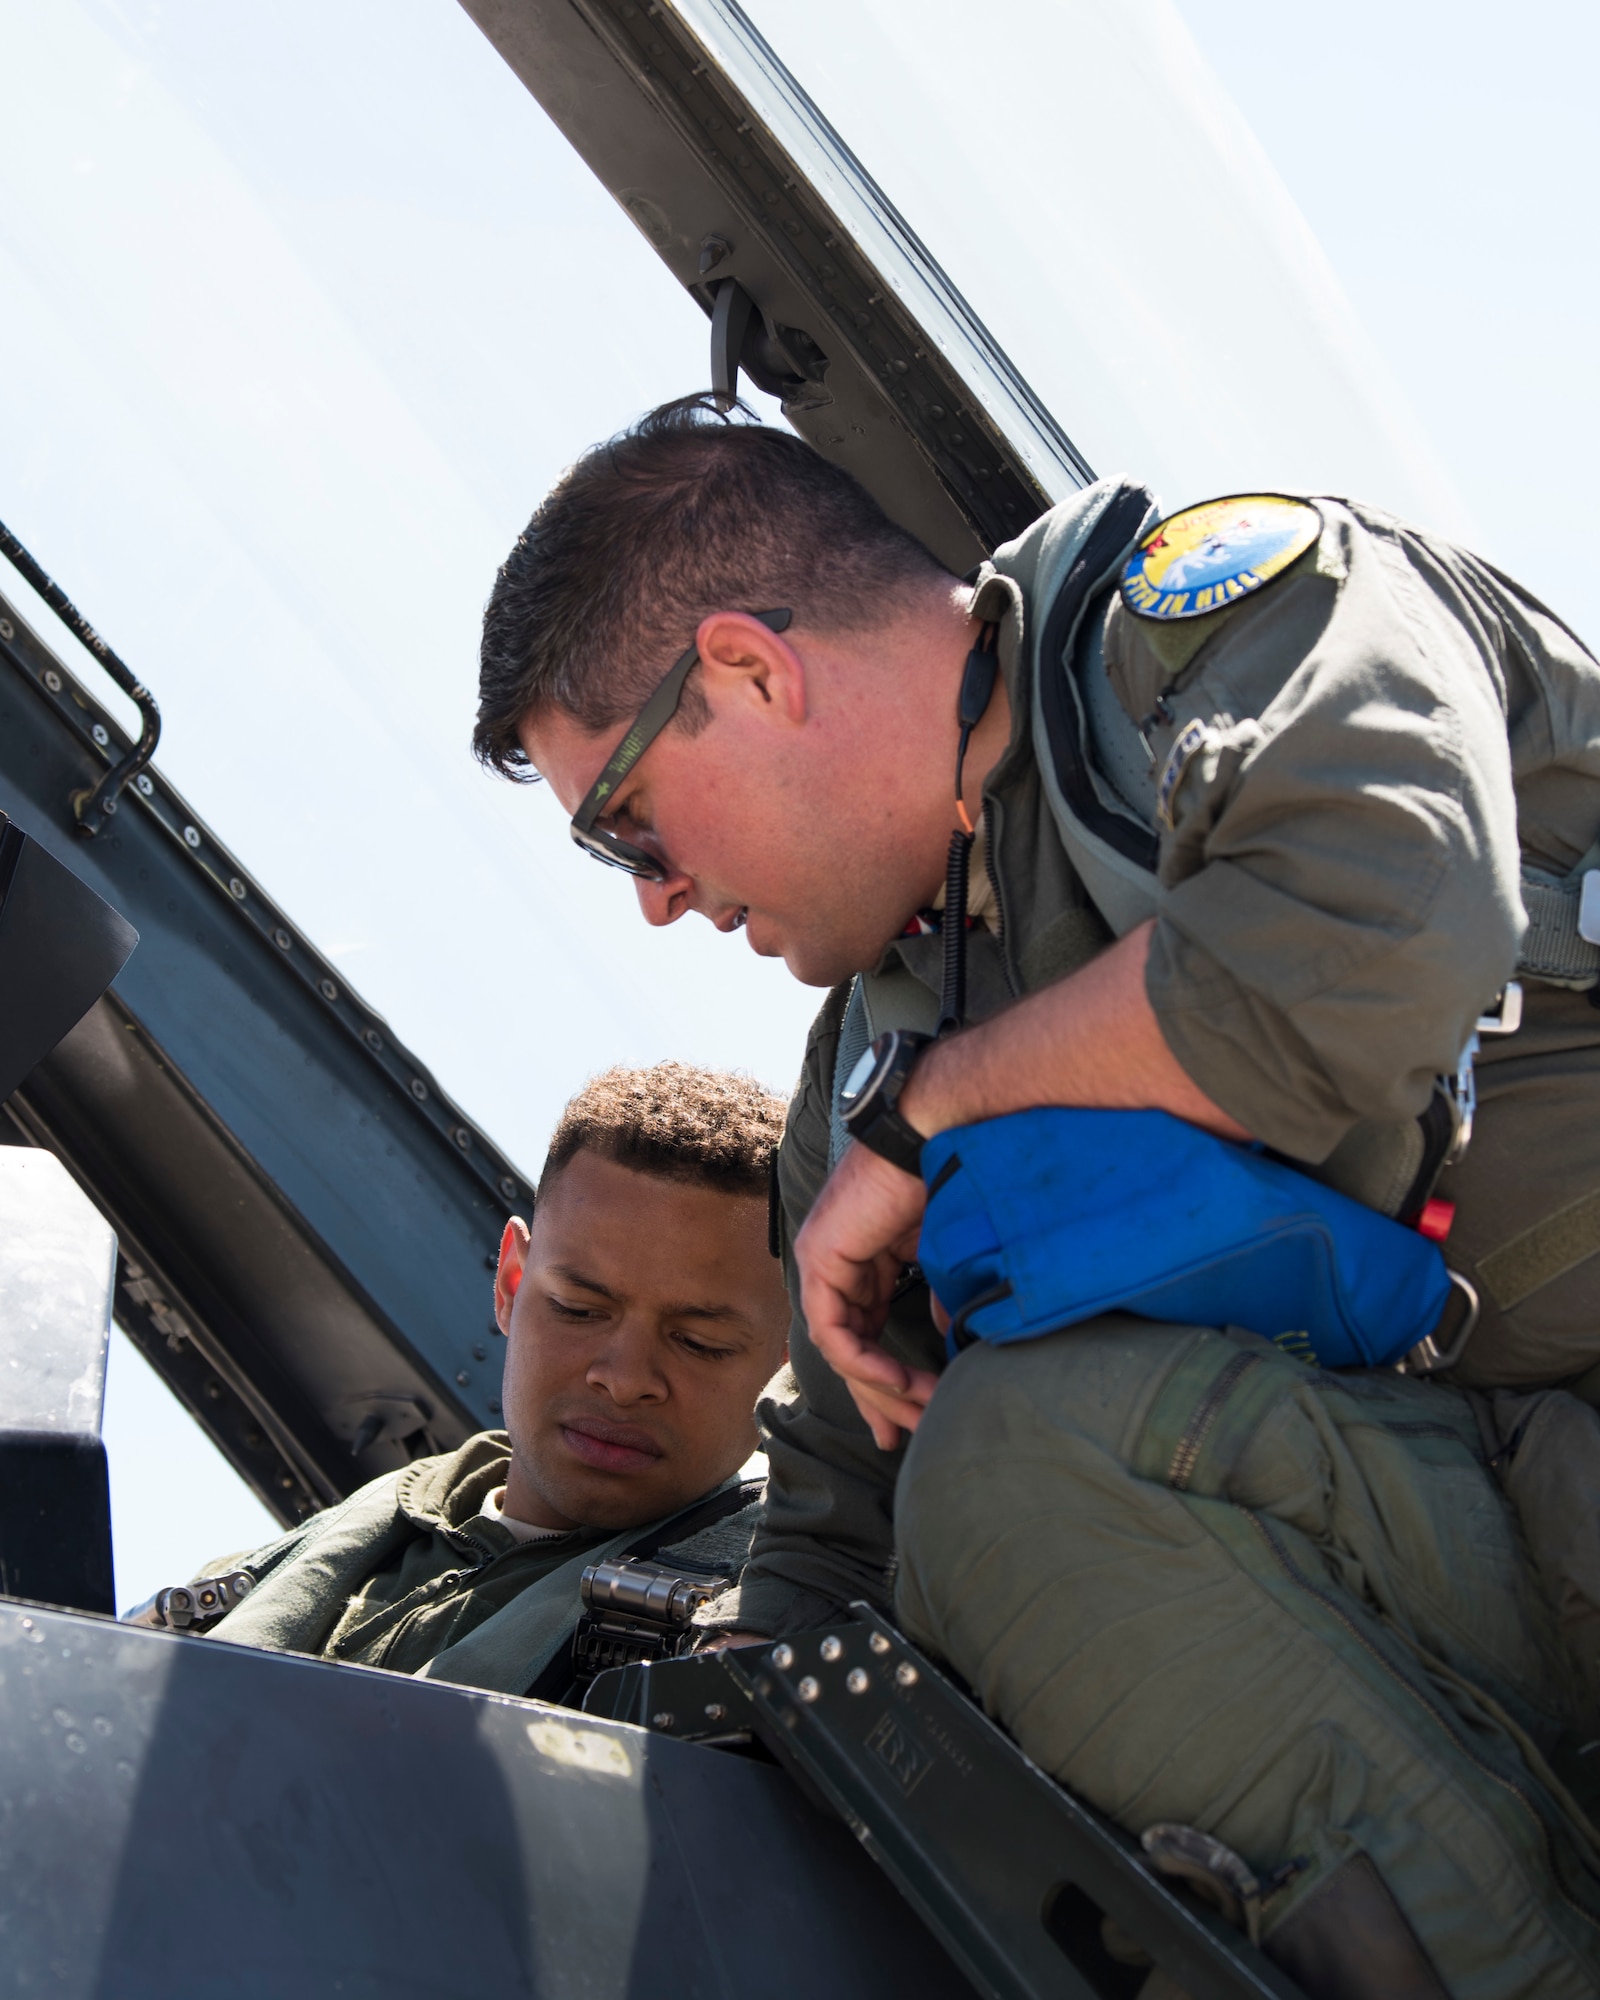 Maj. Jon Farragher, 311th Fighter Squadron assistant director of operations, helps Airman 1st Class Mequail Fridge, 311th Aircraft Maintenance Unit crew chief, buckle into the ejection seat of an F-16 Viper, April 25, 2019, on Hill Air Force Base, Utah. The 311th FS had a goal of eight familiarization flights per day for operations and maintenance personnel during exercise Venom 19-01. (U.S. Air Force photo by Staff Sgt. BreeAnn Sachs)